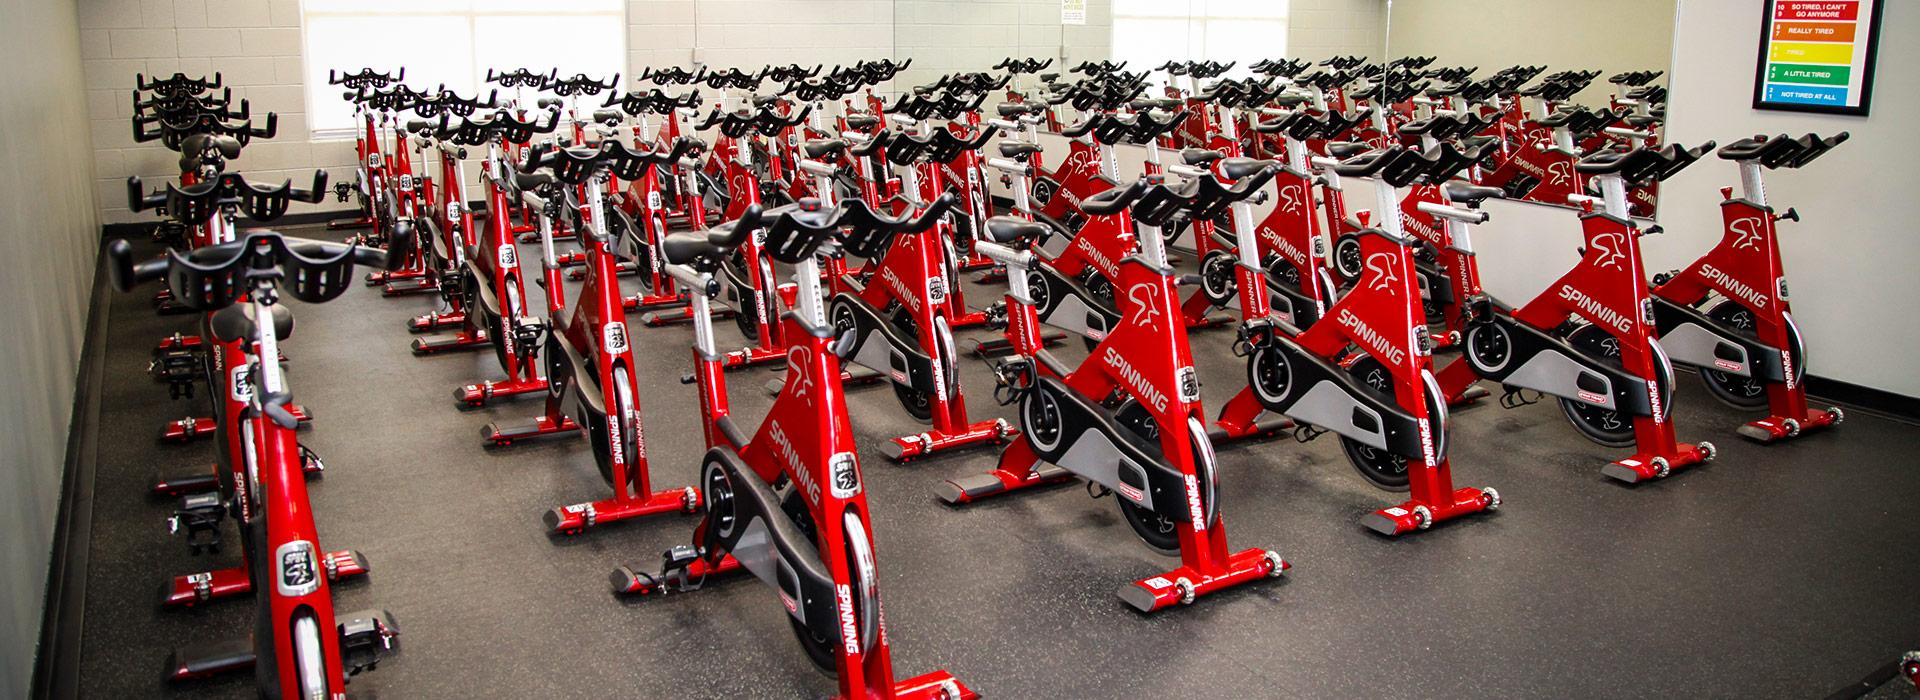 Great Bridge/ Hickory Family YMCA group cycling room